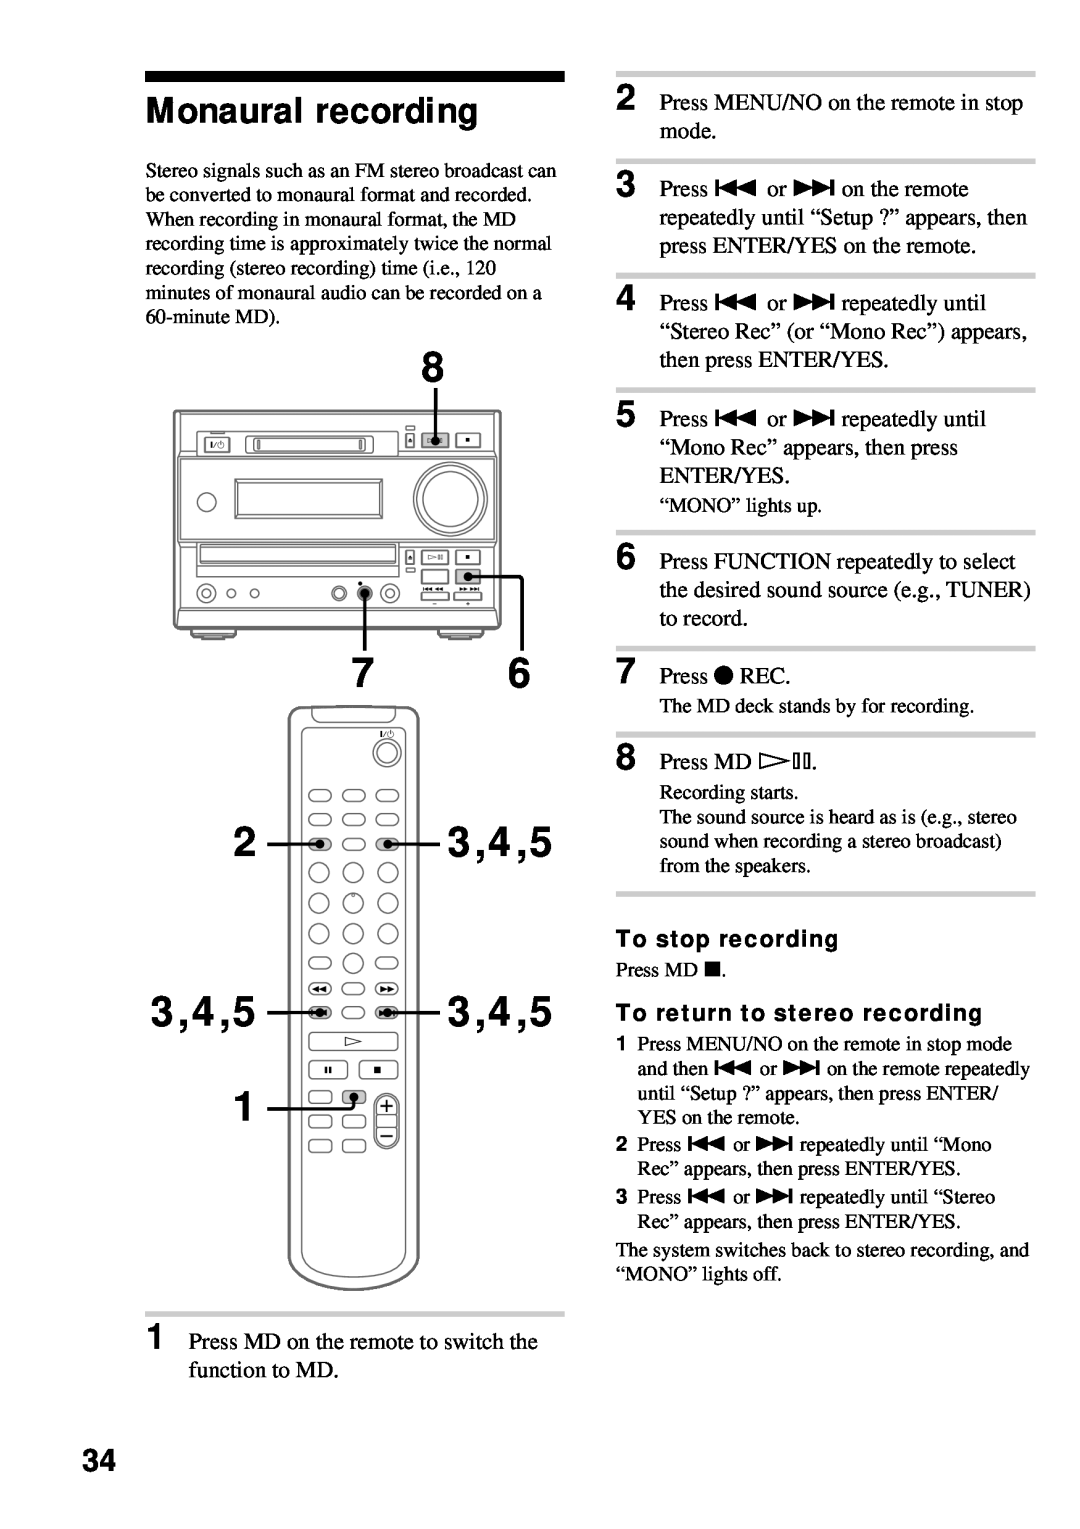 Sony DHC-MD373 manual Monaural recording, 2 3,4,5, 3,4,5 . > 3,4,5, To return to stereo recording, To stop recording 